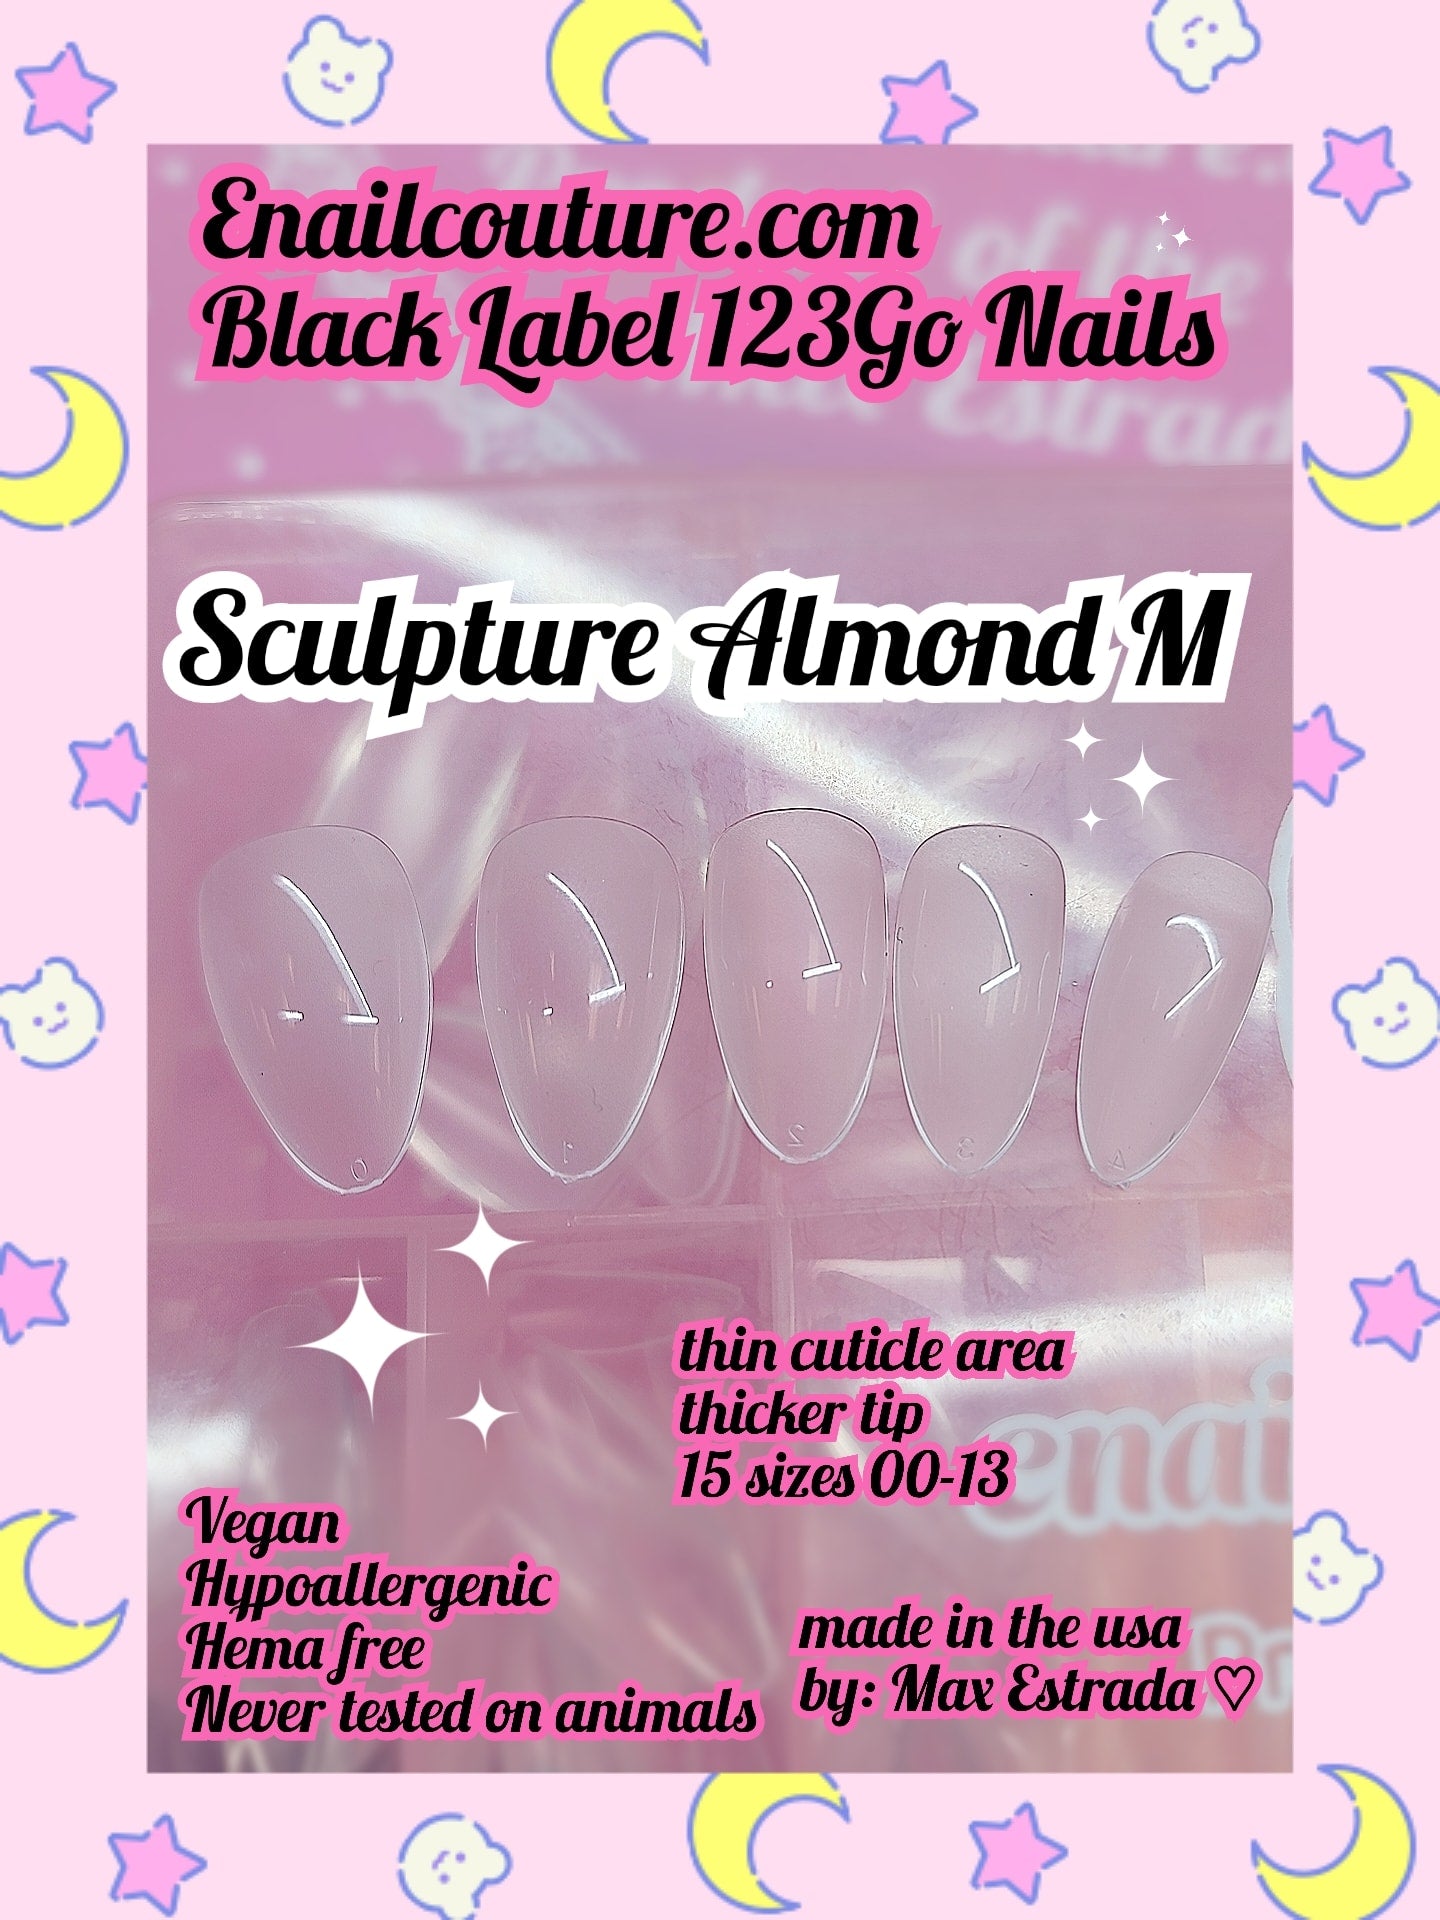 123go Black Label Nails Sculpture Almond M  (Soft Gel Nail Tips- Clear Cover Full Nail Extensions - Pre-shaped Acrylic False Gelly Nail Tips 15 Sizes for DIY Salon Nail Extensions)